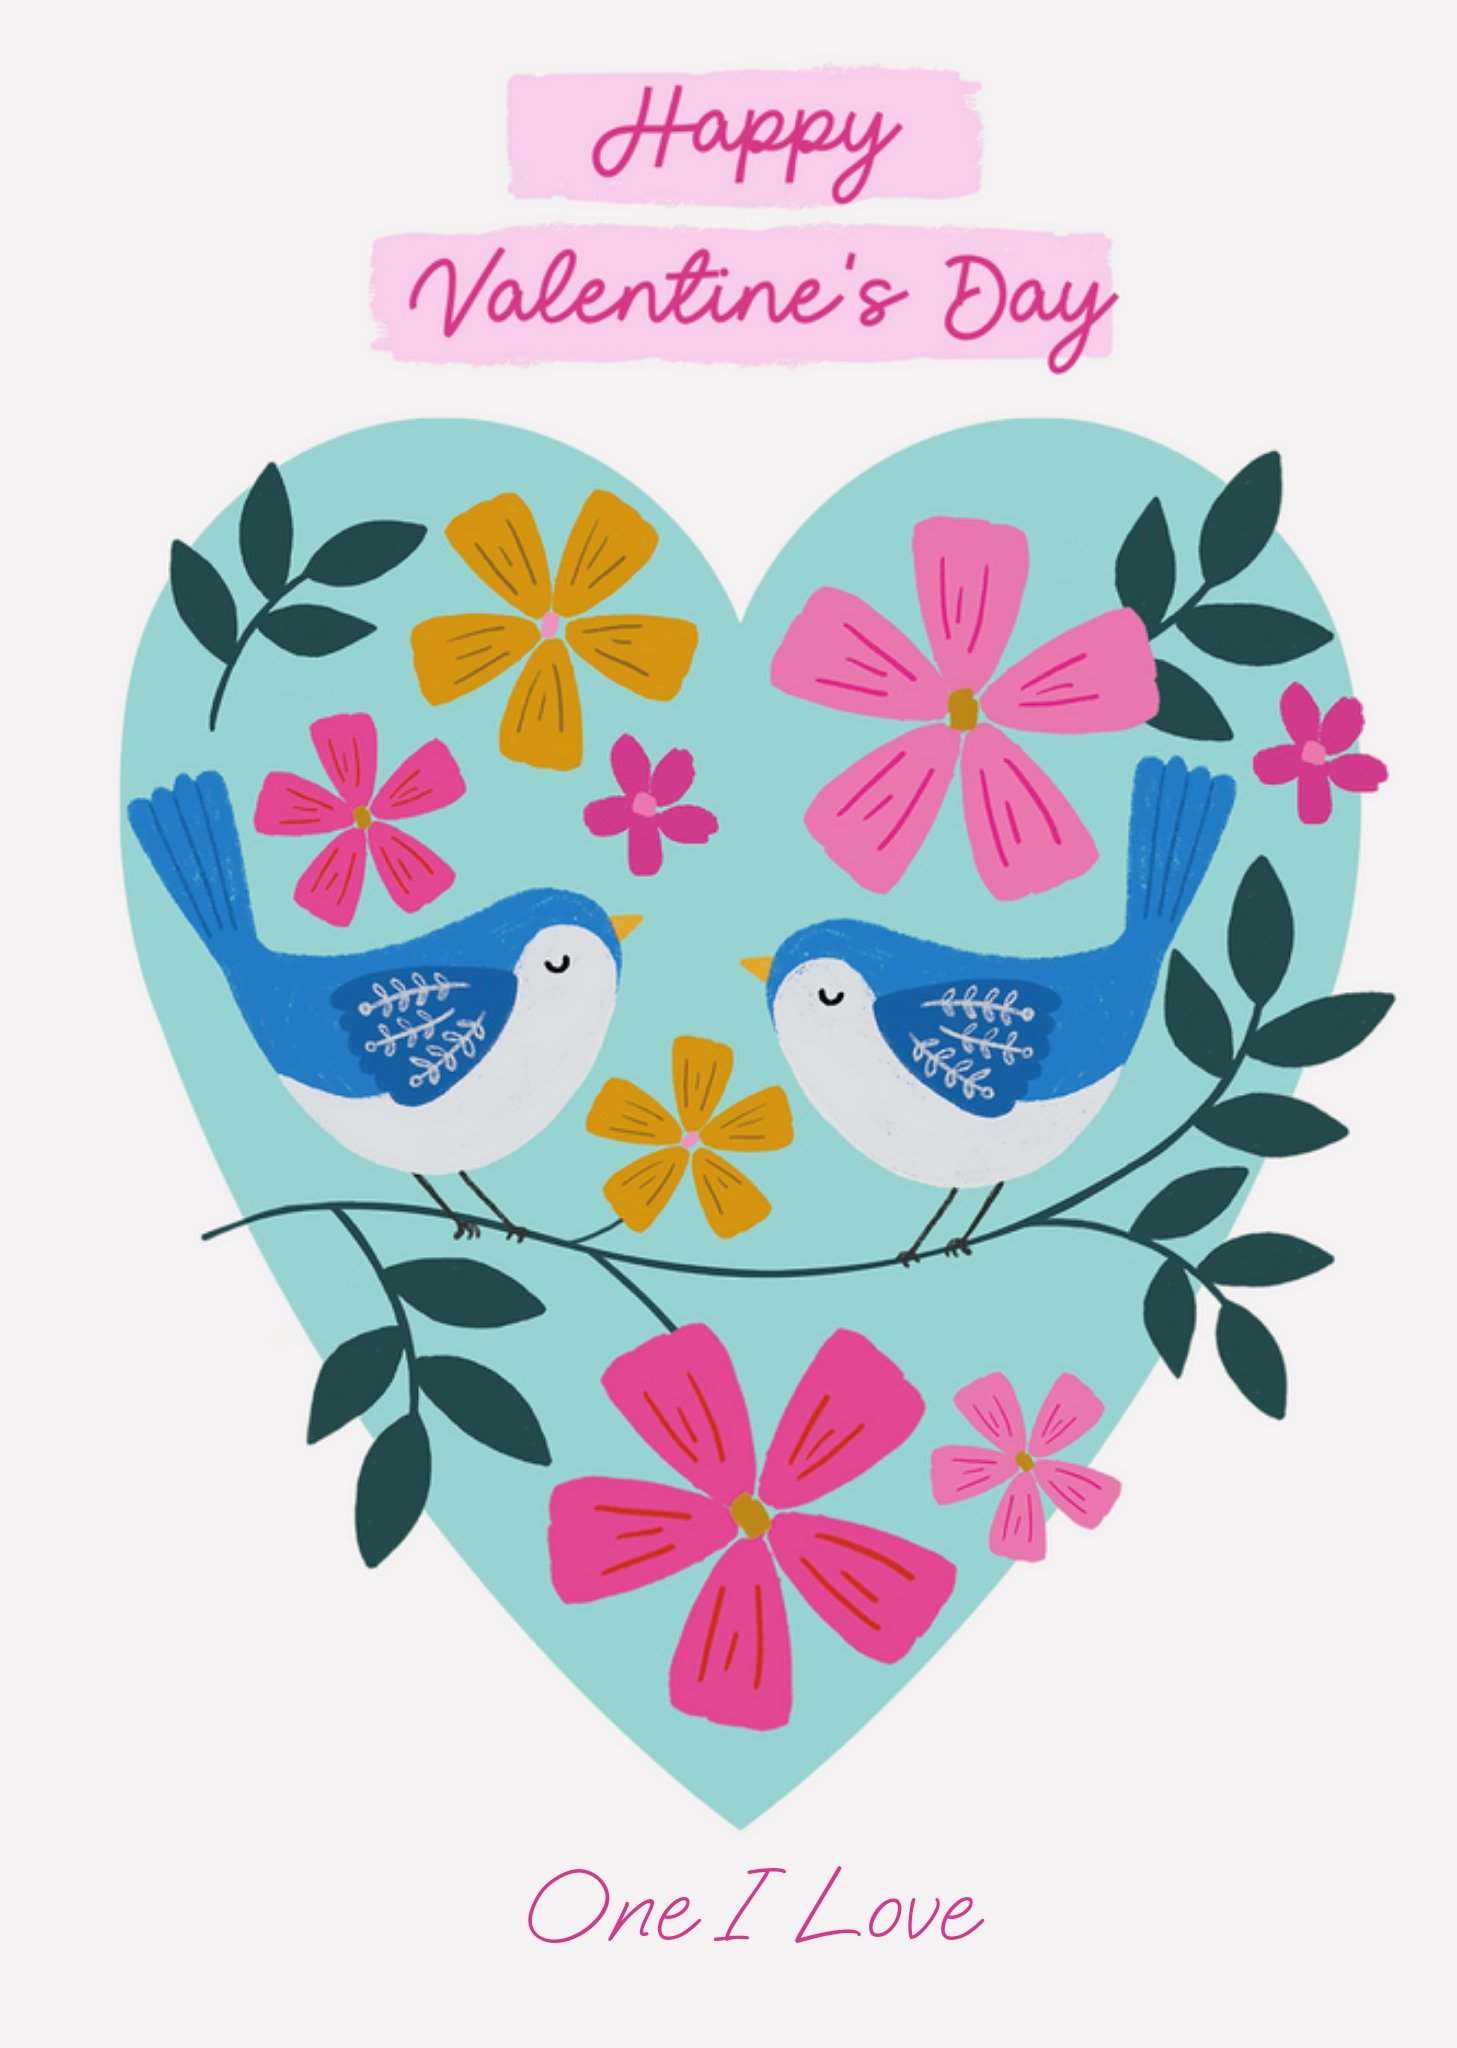 Moonpig Vibrant Sweet Illustrated Love Birds And Flowers Valentine's Day Card Ecard